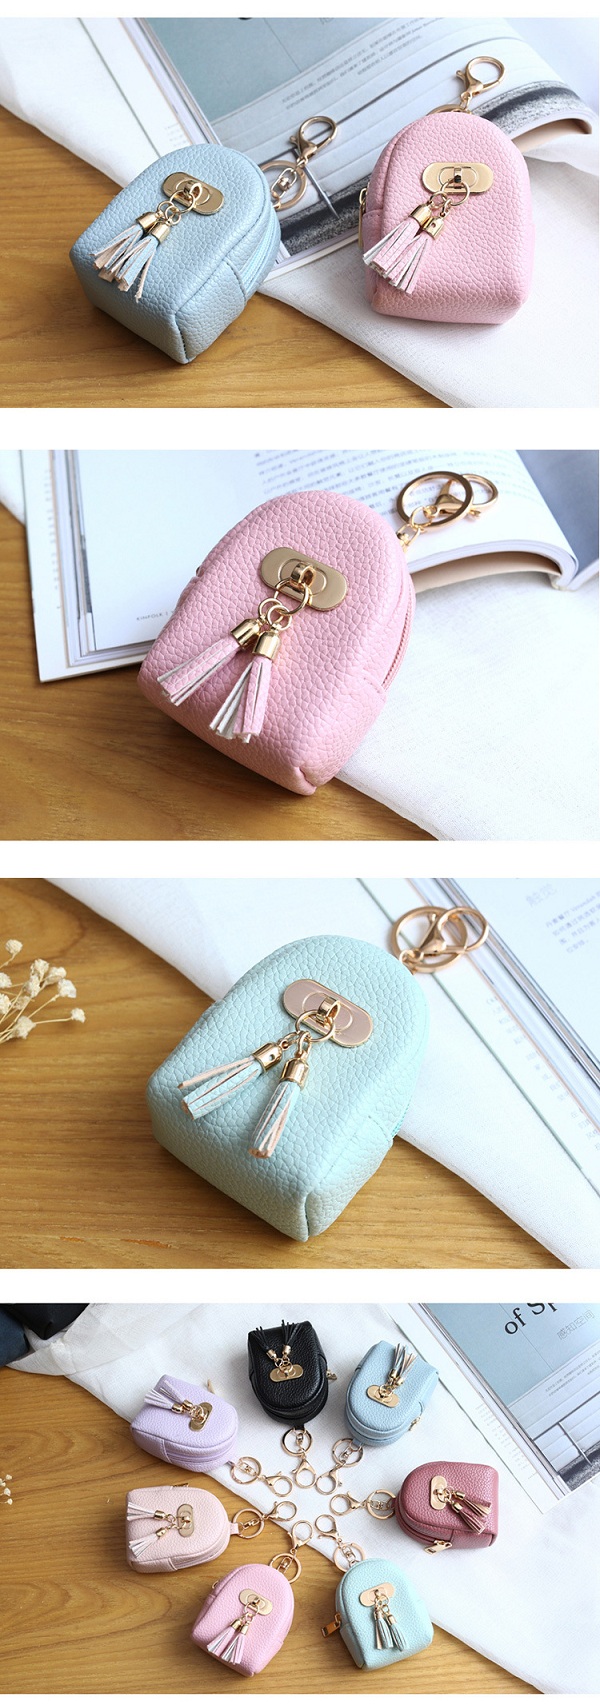 Women-Faux-Leather-Cute-Change-Wallet-Card-Holder-Coin-Purse-1214468